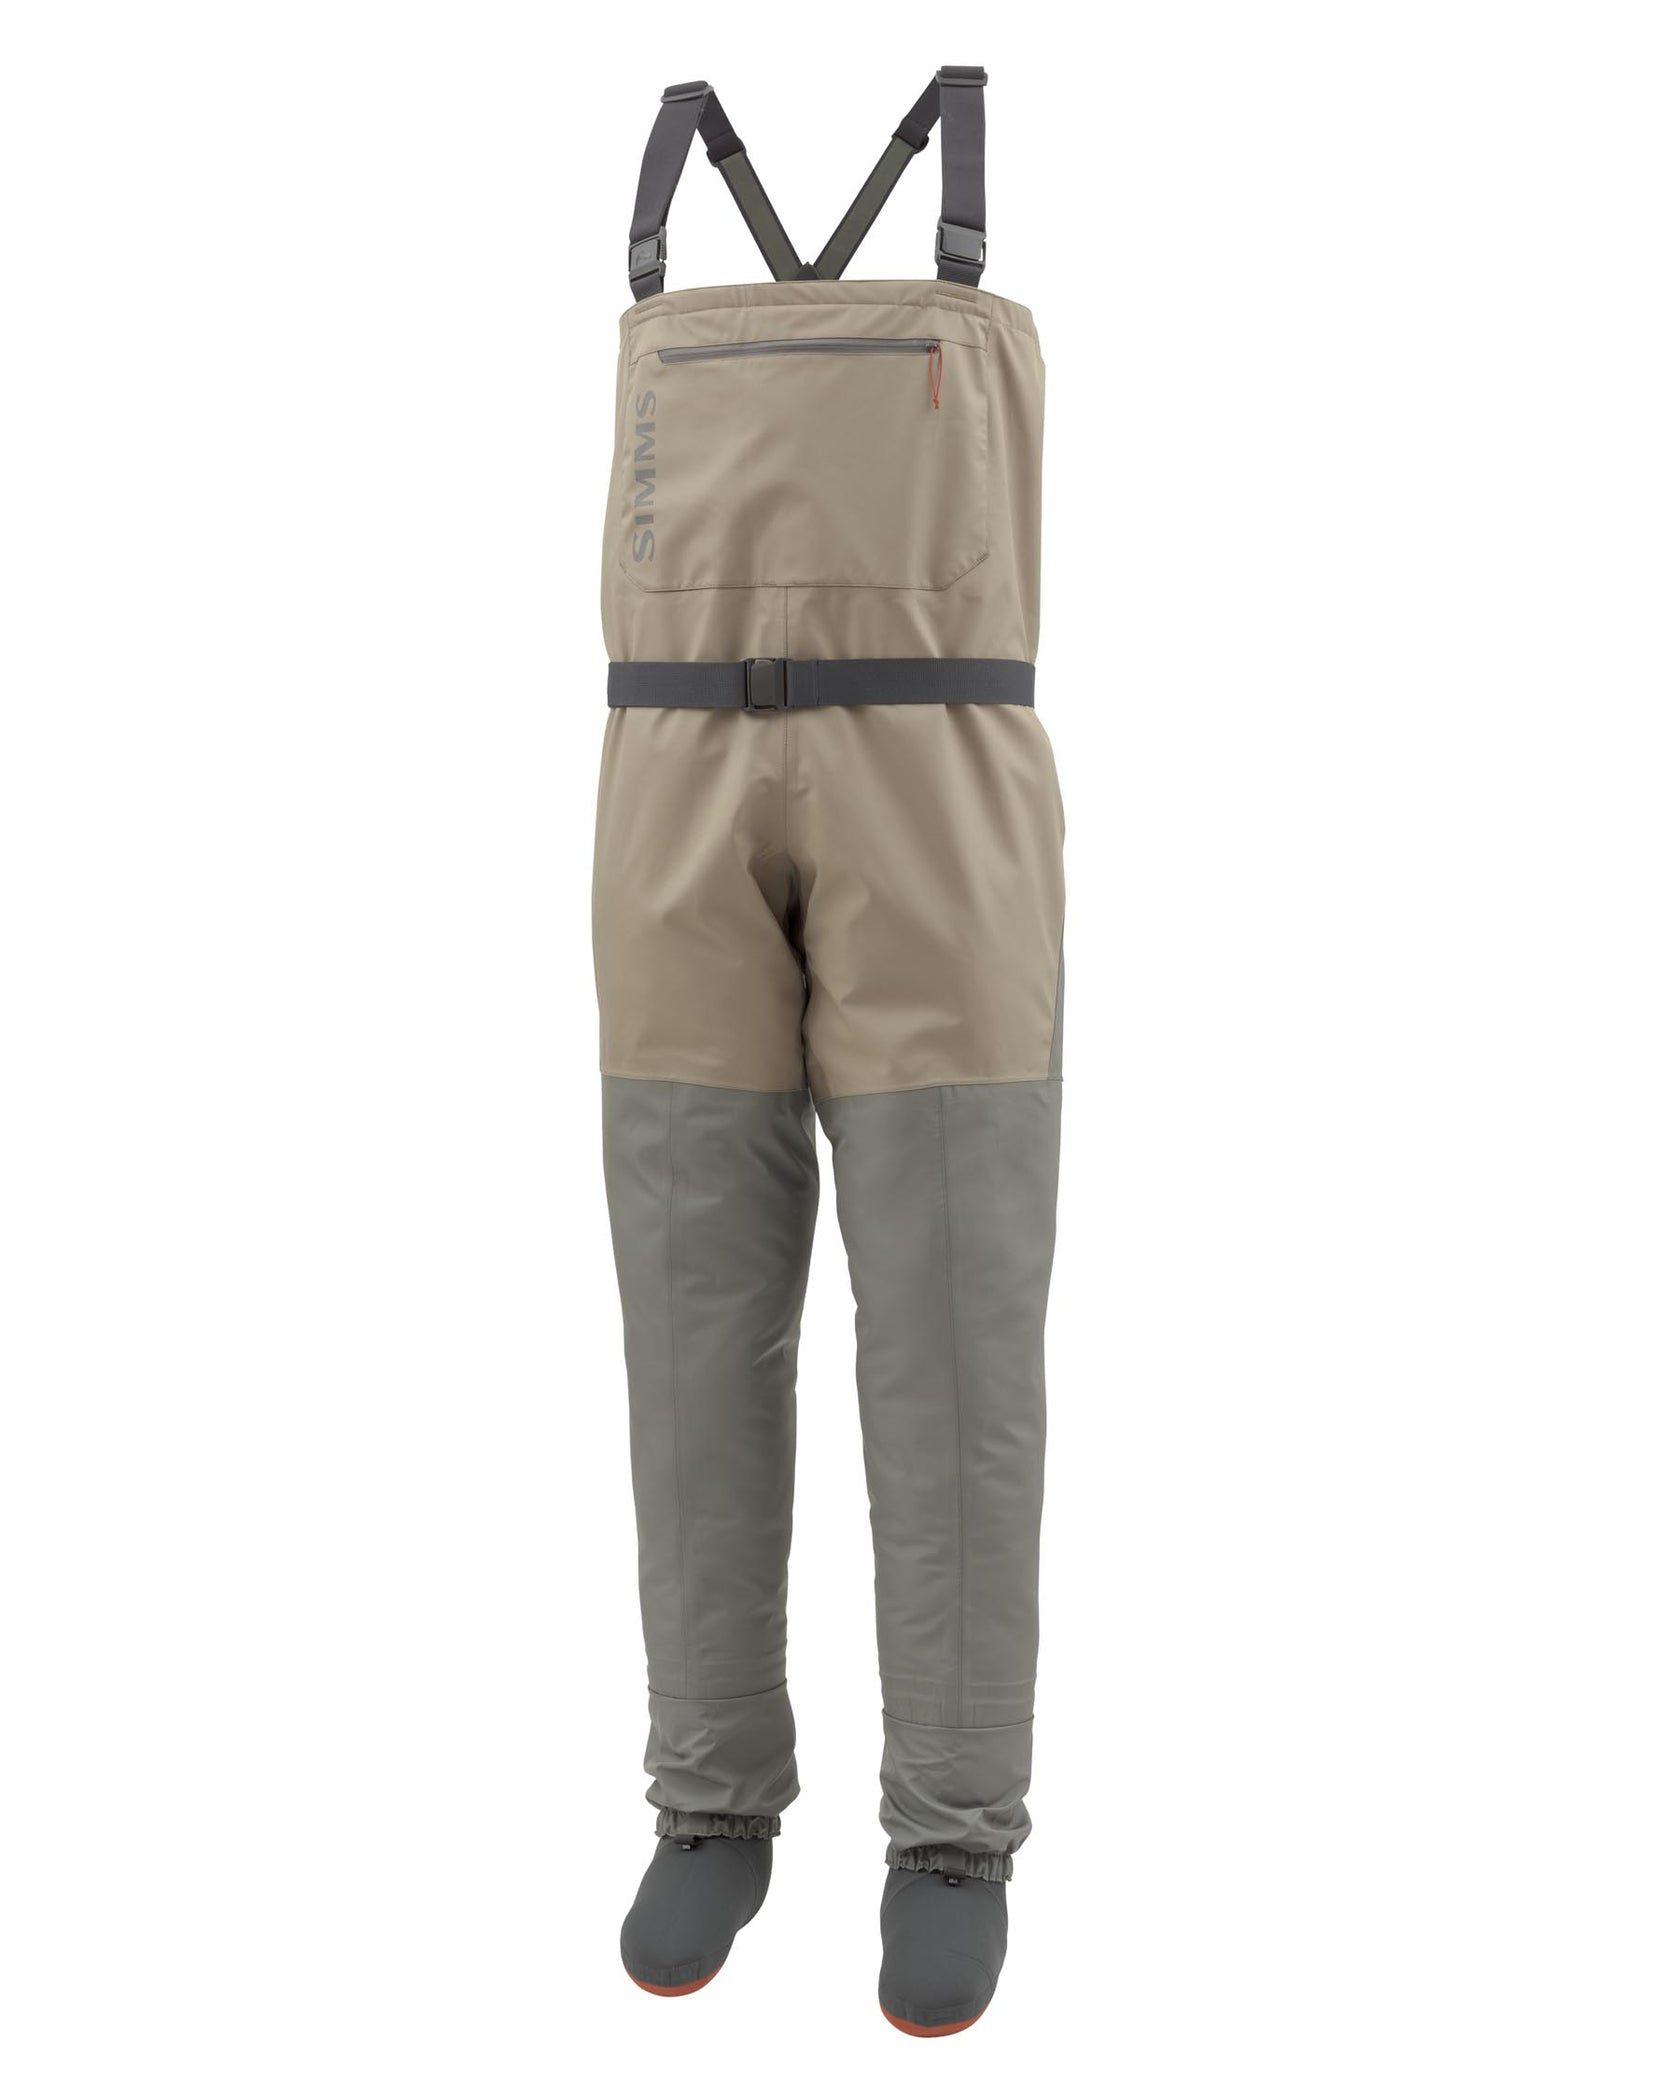 Simms M's Tributary Stockingfoot Wader - Extra Large Short